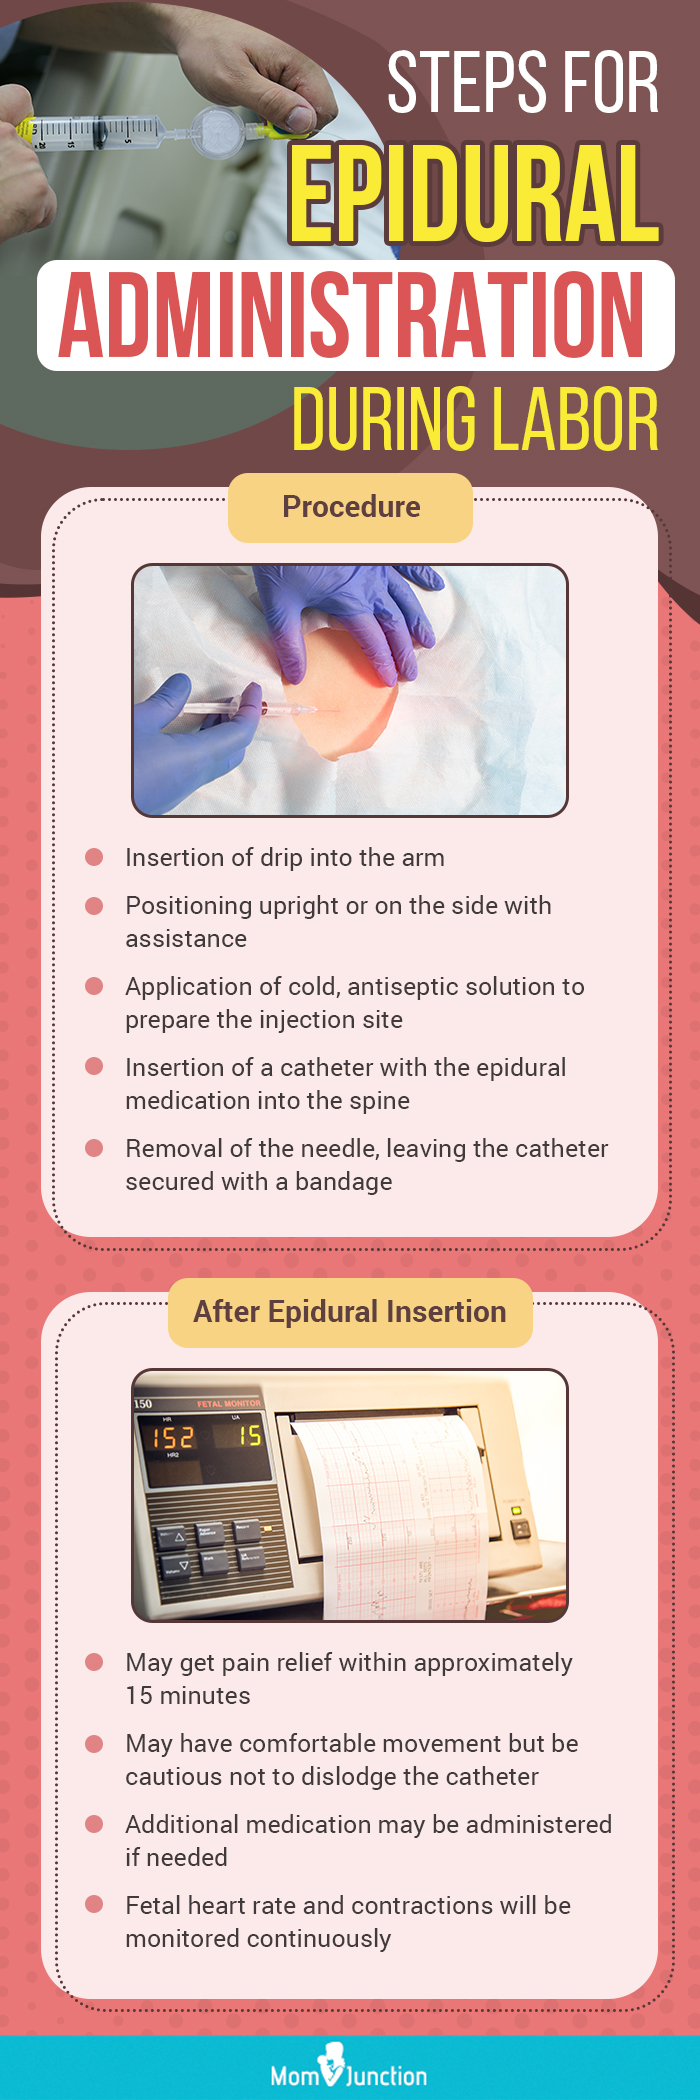 steps for epidural administration during labor (infographic)